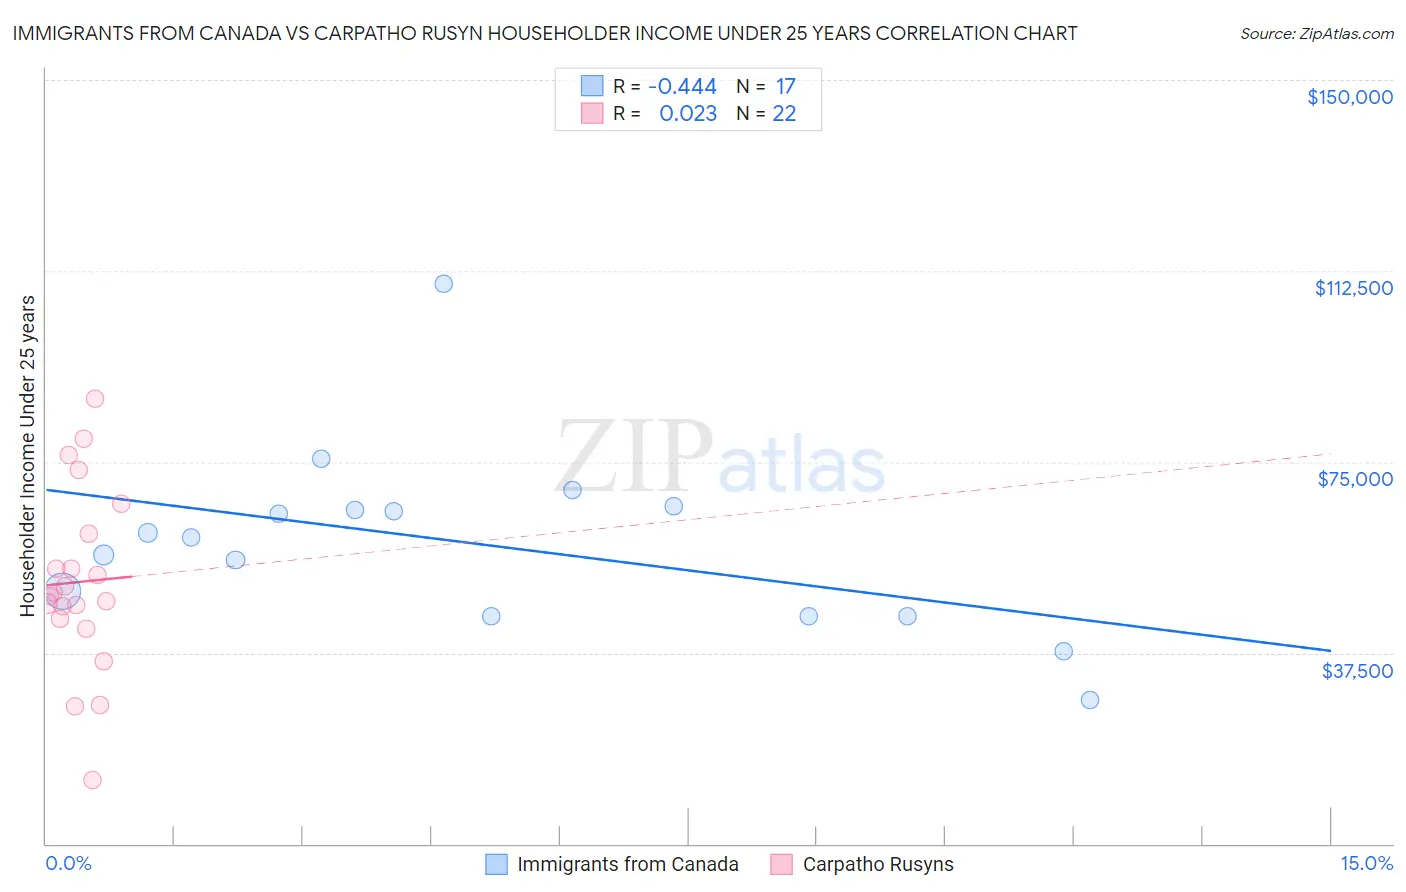 Immigrants from Canada vs Carpatho Rusyn Householder Income Under 25 years